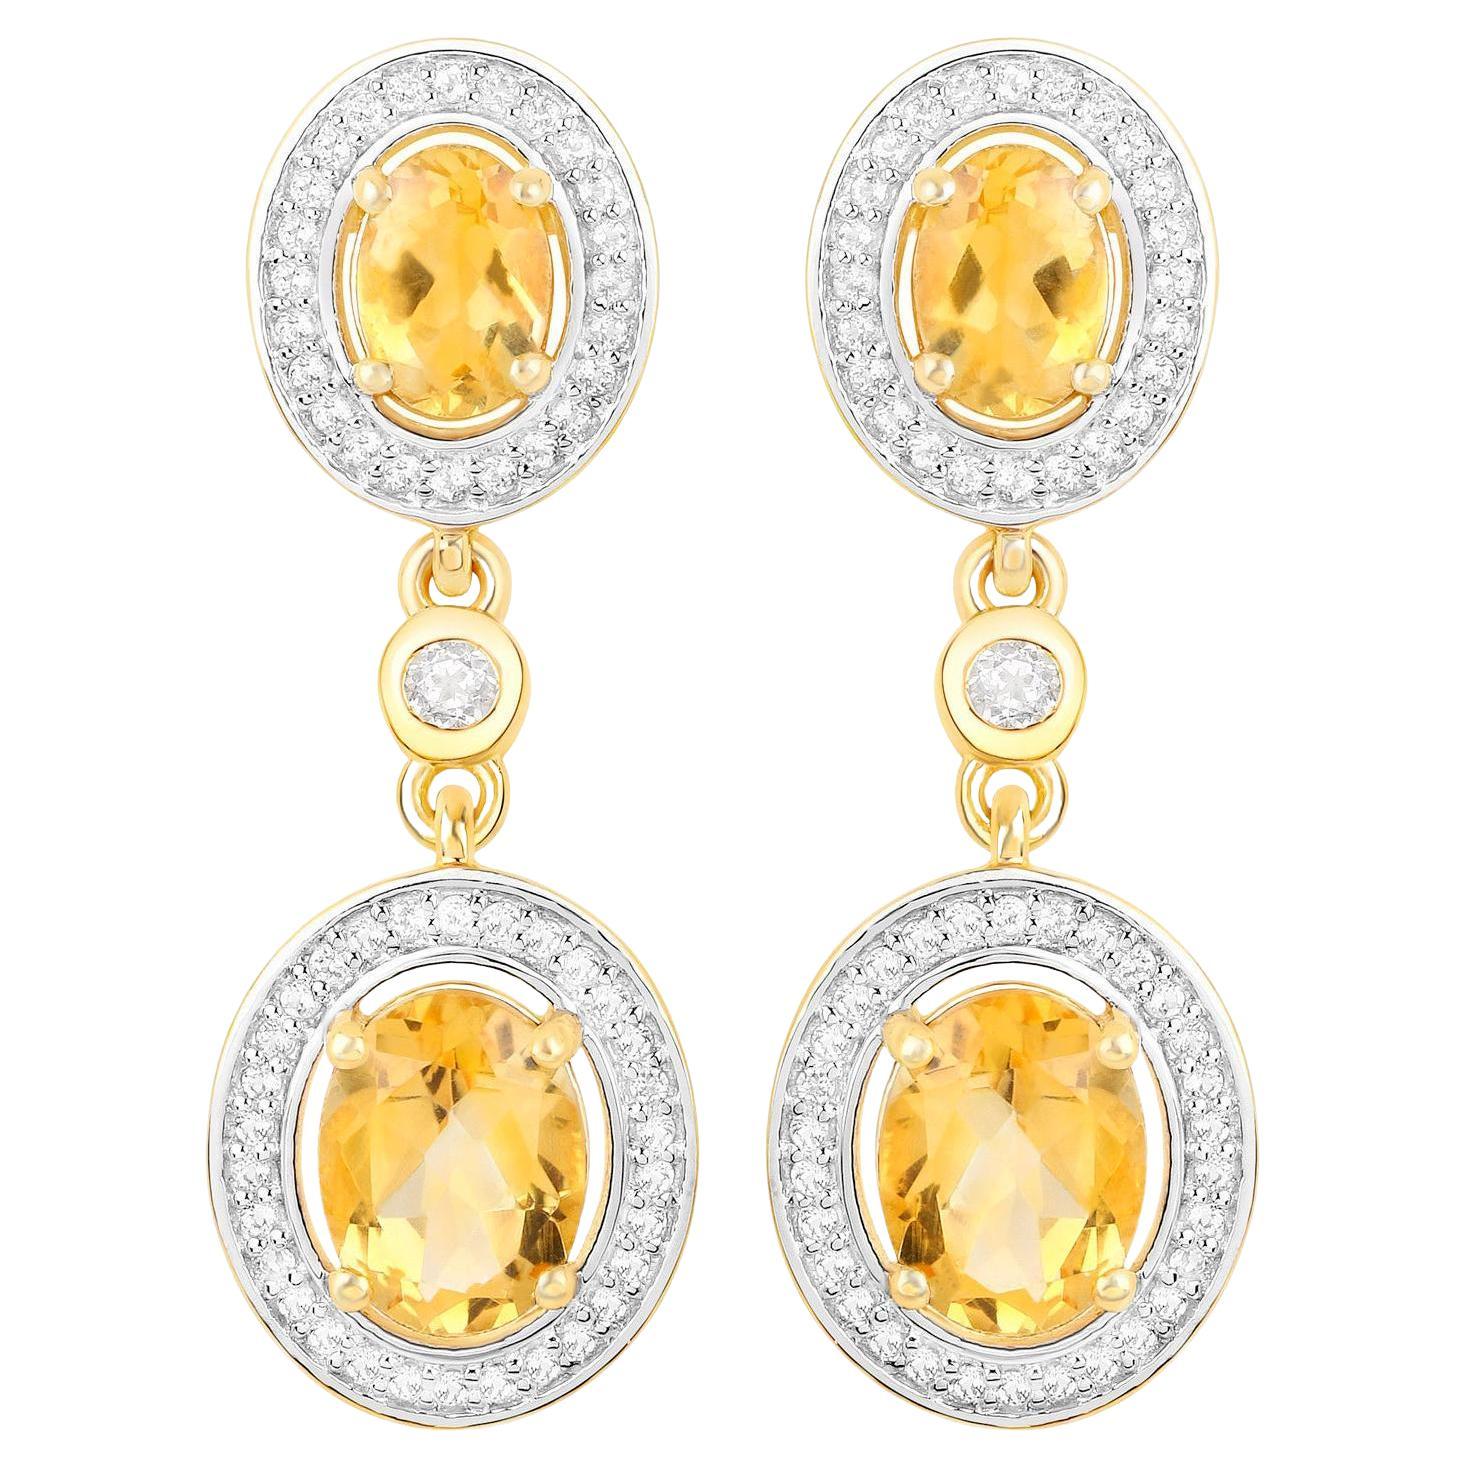 Citrine Earrings With Topazes 5.70 Carats 18K Yellow Gold Plated Sterling Silver